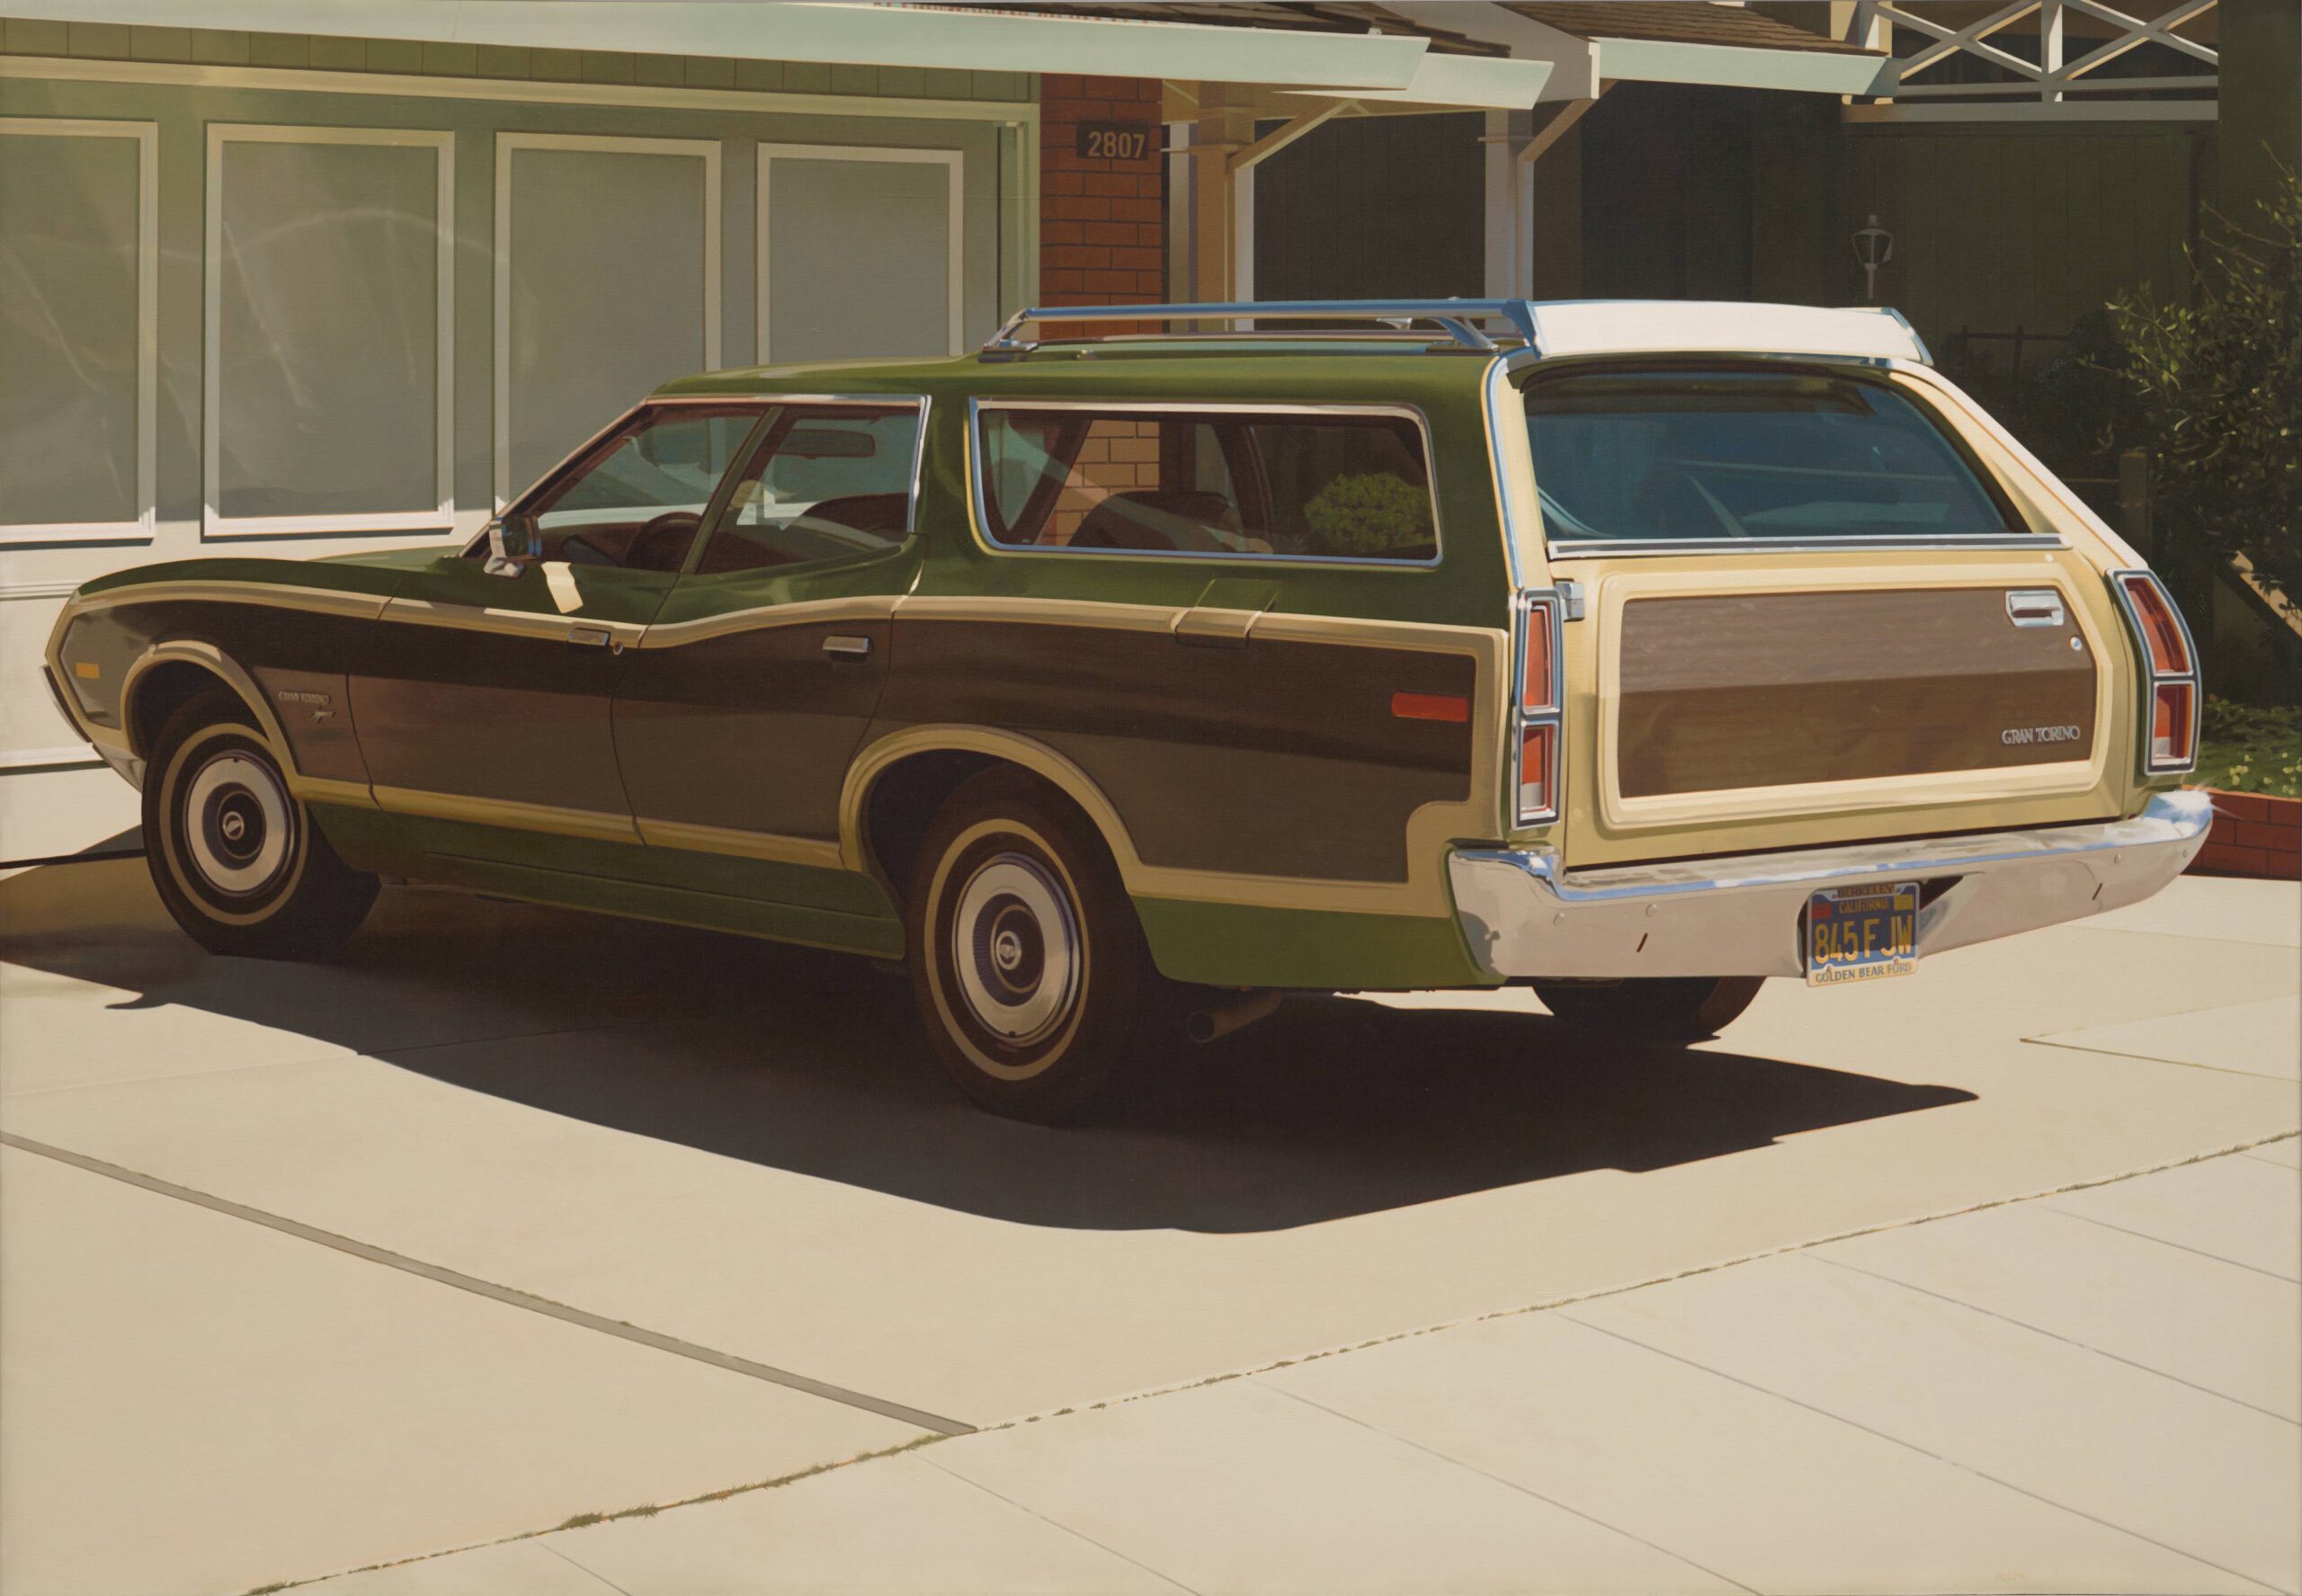 A photorealistic painting of green and tan 1970s station wagon parked in a driveway.